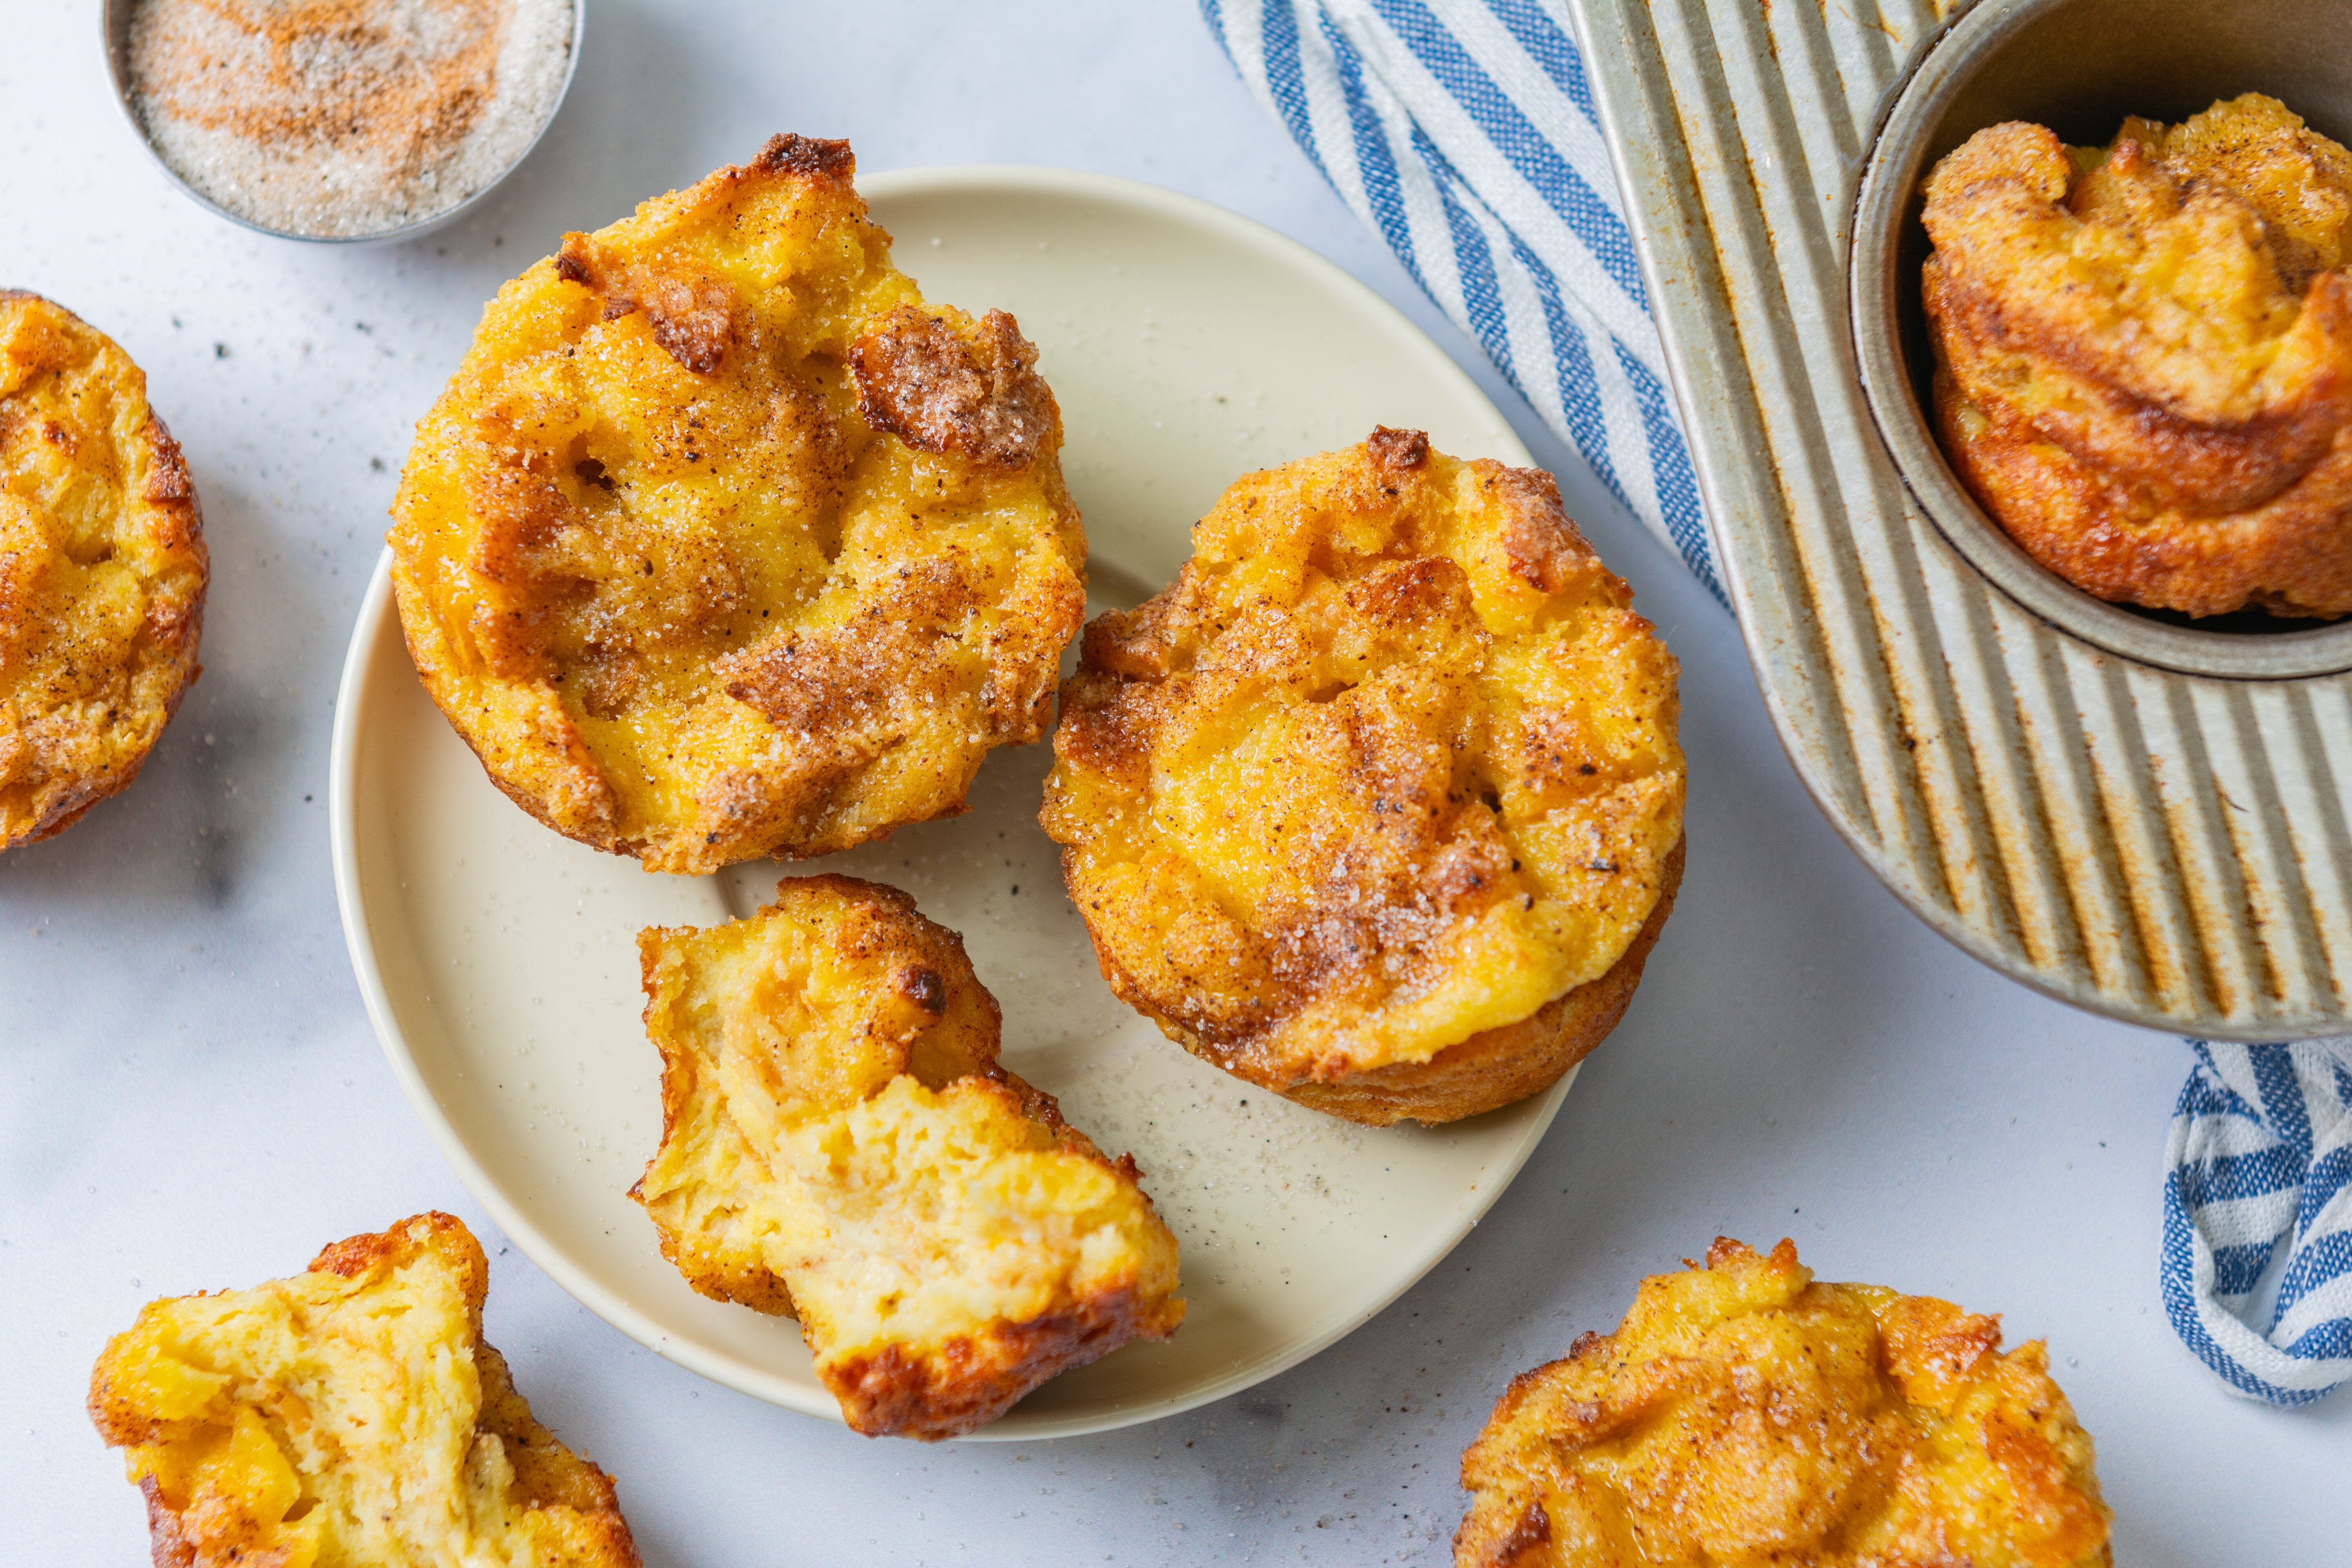 25 Sweet & Savory Mini Muffin Recipes For Any Occasion